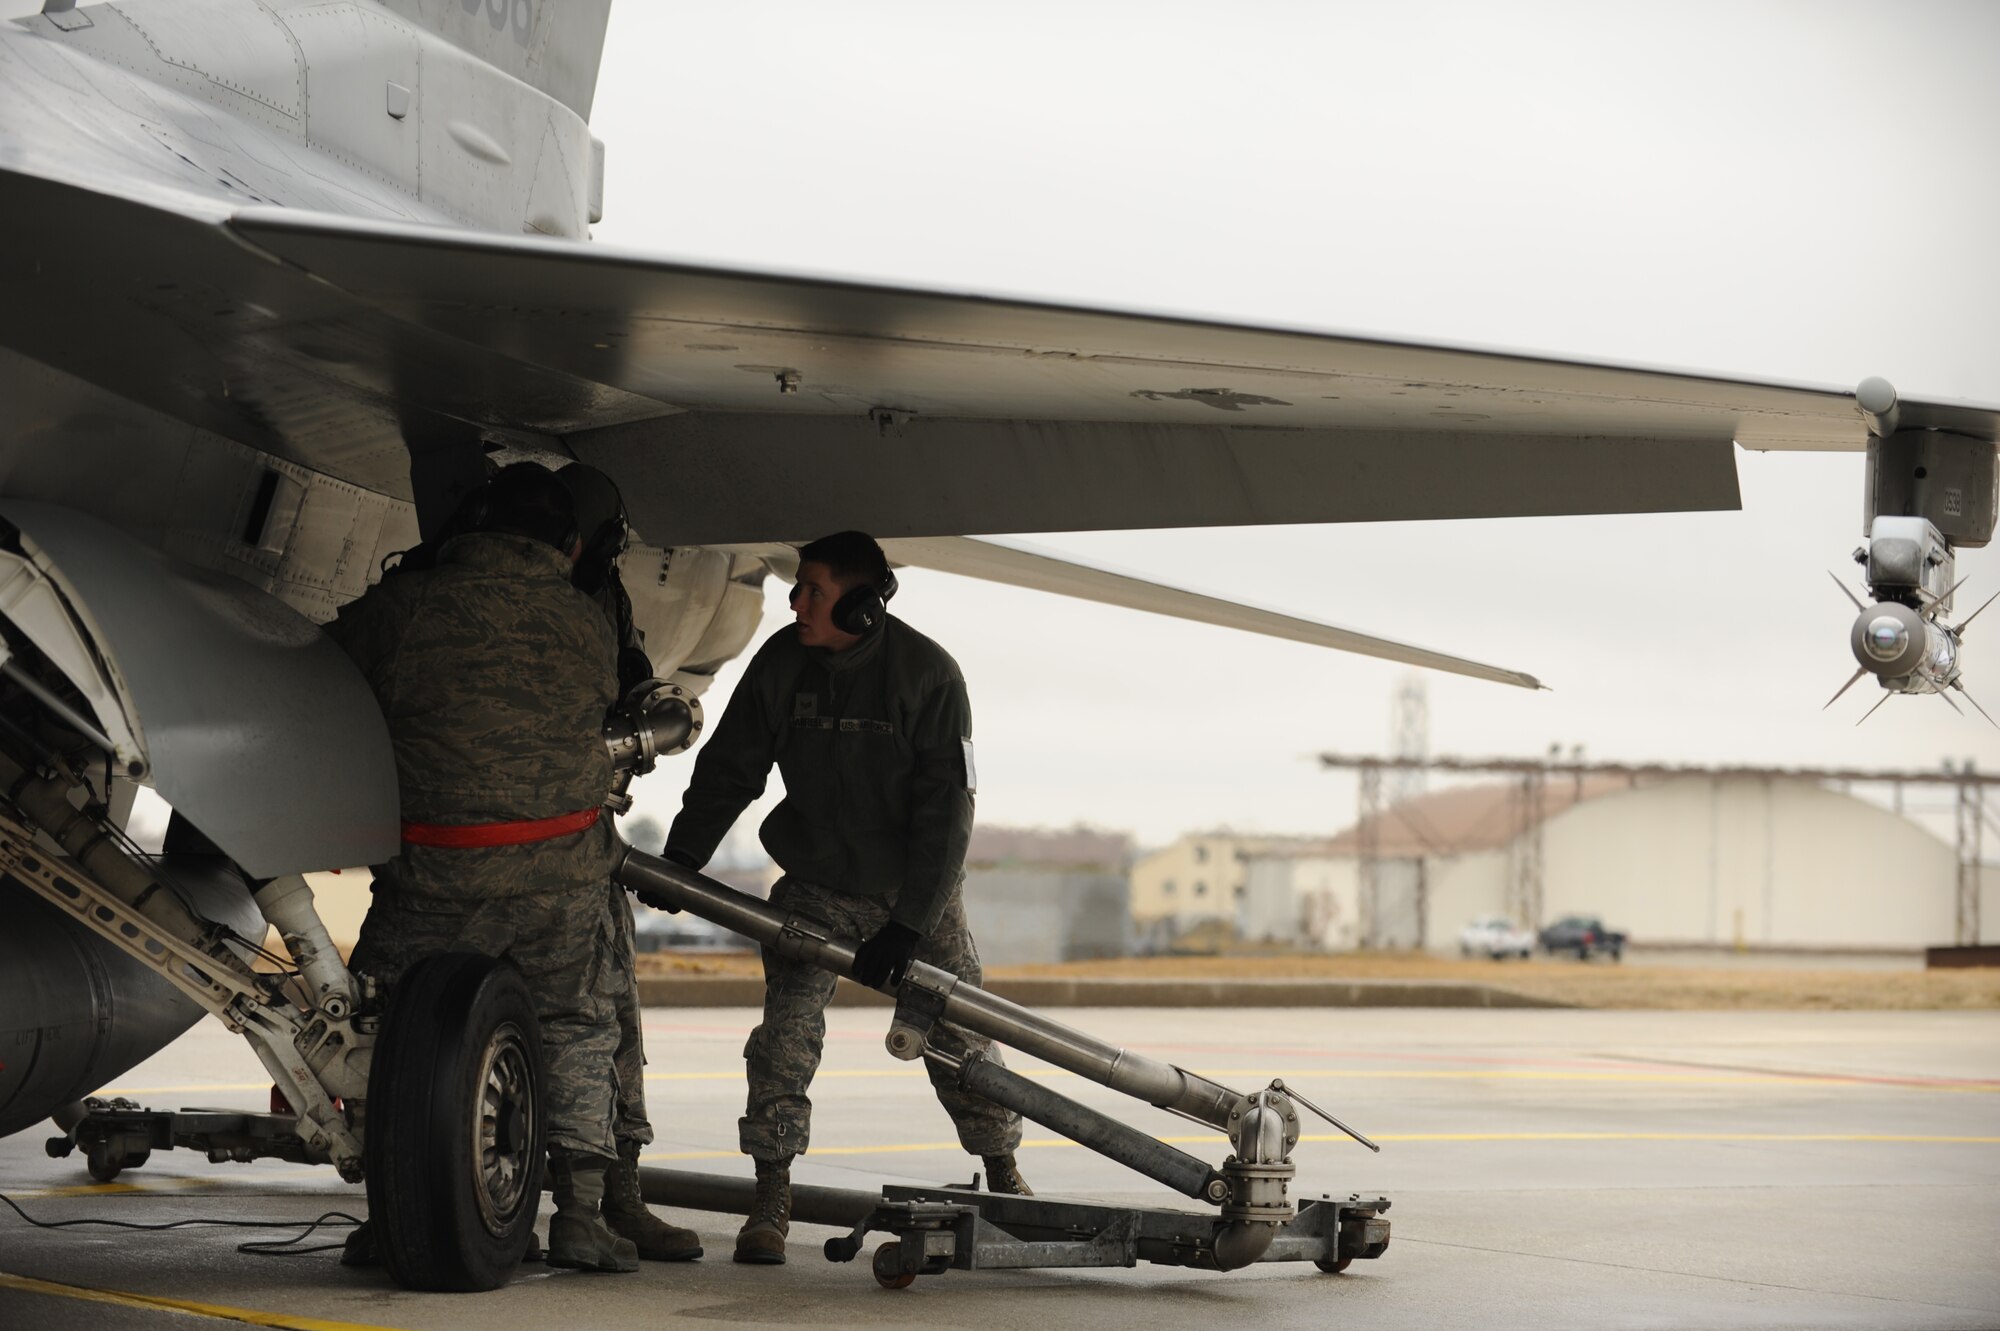 SPANGDAHLEM AIR BASE, Germany – Airmen from the 52nd Logistics Readiness Squadron and 52nd Aircraft Maintenance Squadron work together to lift a Type-4 hydrant system to refuel an F-16 Fighting Falcon during hot-pit refueling here Feb. 16. Hot-pit refueling saves time, manpower and equipment usage by using a Type-4 hydrant system to refuel active aircraft between training missions. Refueling still-running aircraft requires fewer Airmen and no refueling trucks because only two 52nd Logistics Readiness Squadron Fuels Distribution Airmen are needed to operate the hydrant system. (U.S. Air Force photo by Airman 1st Class Matthew B. Fredericks/Released) (U.S. Air Force photo by Airman 1st Class Matthew B. Fredericks/Released)